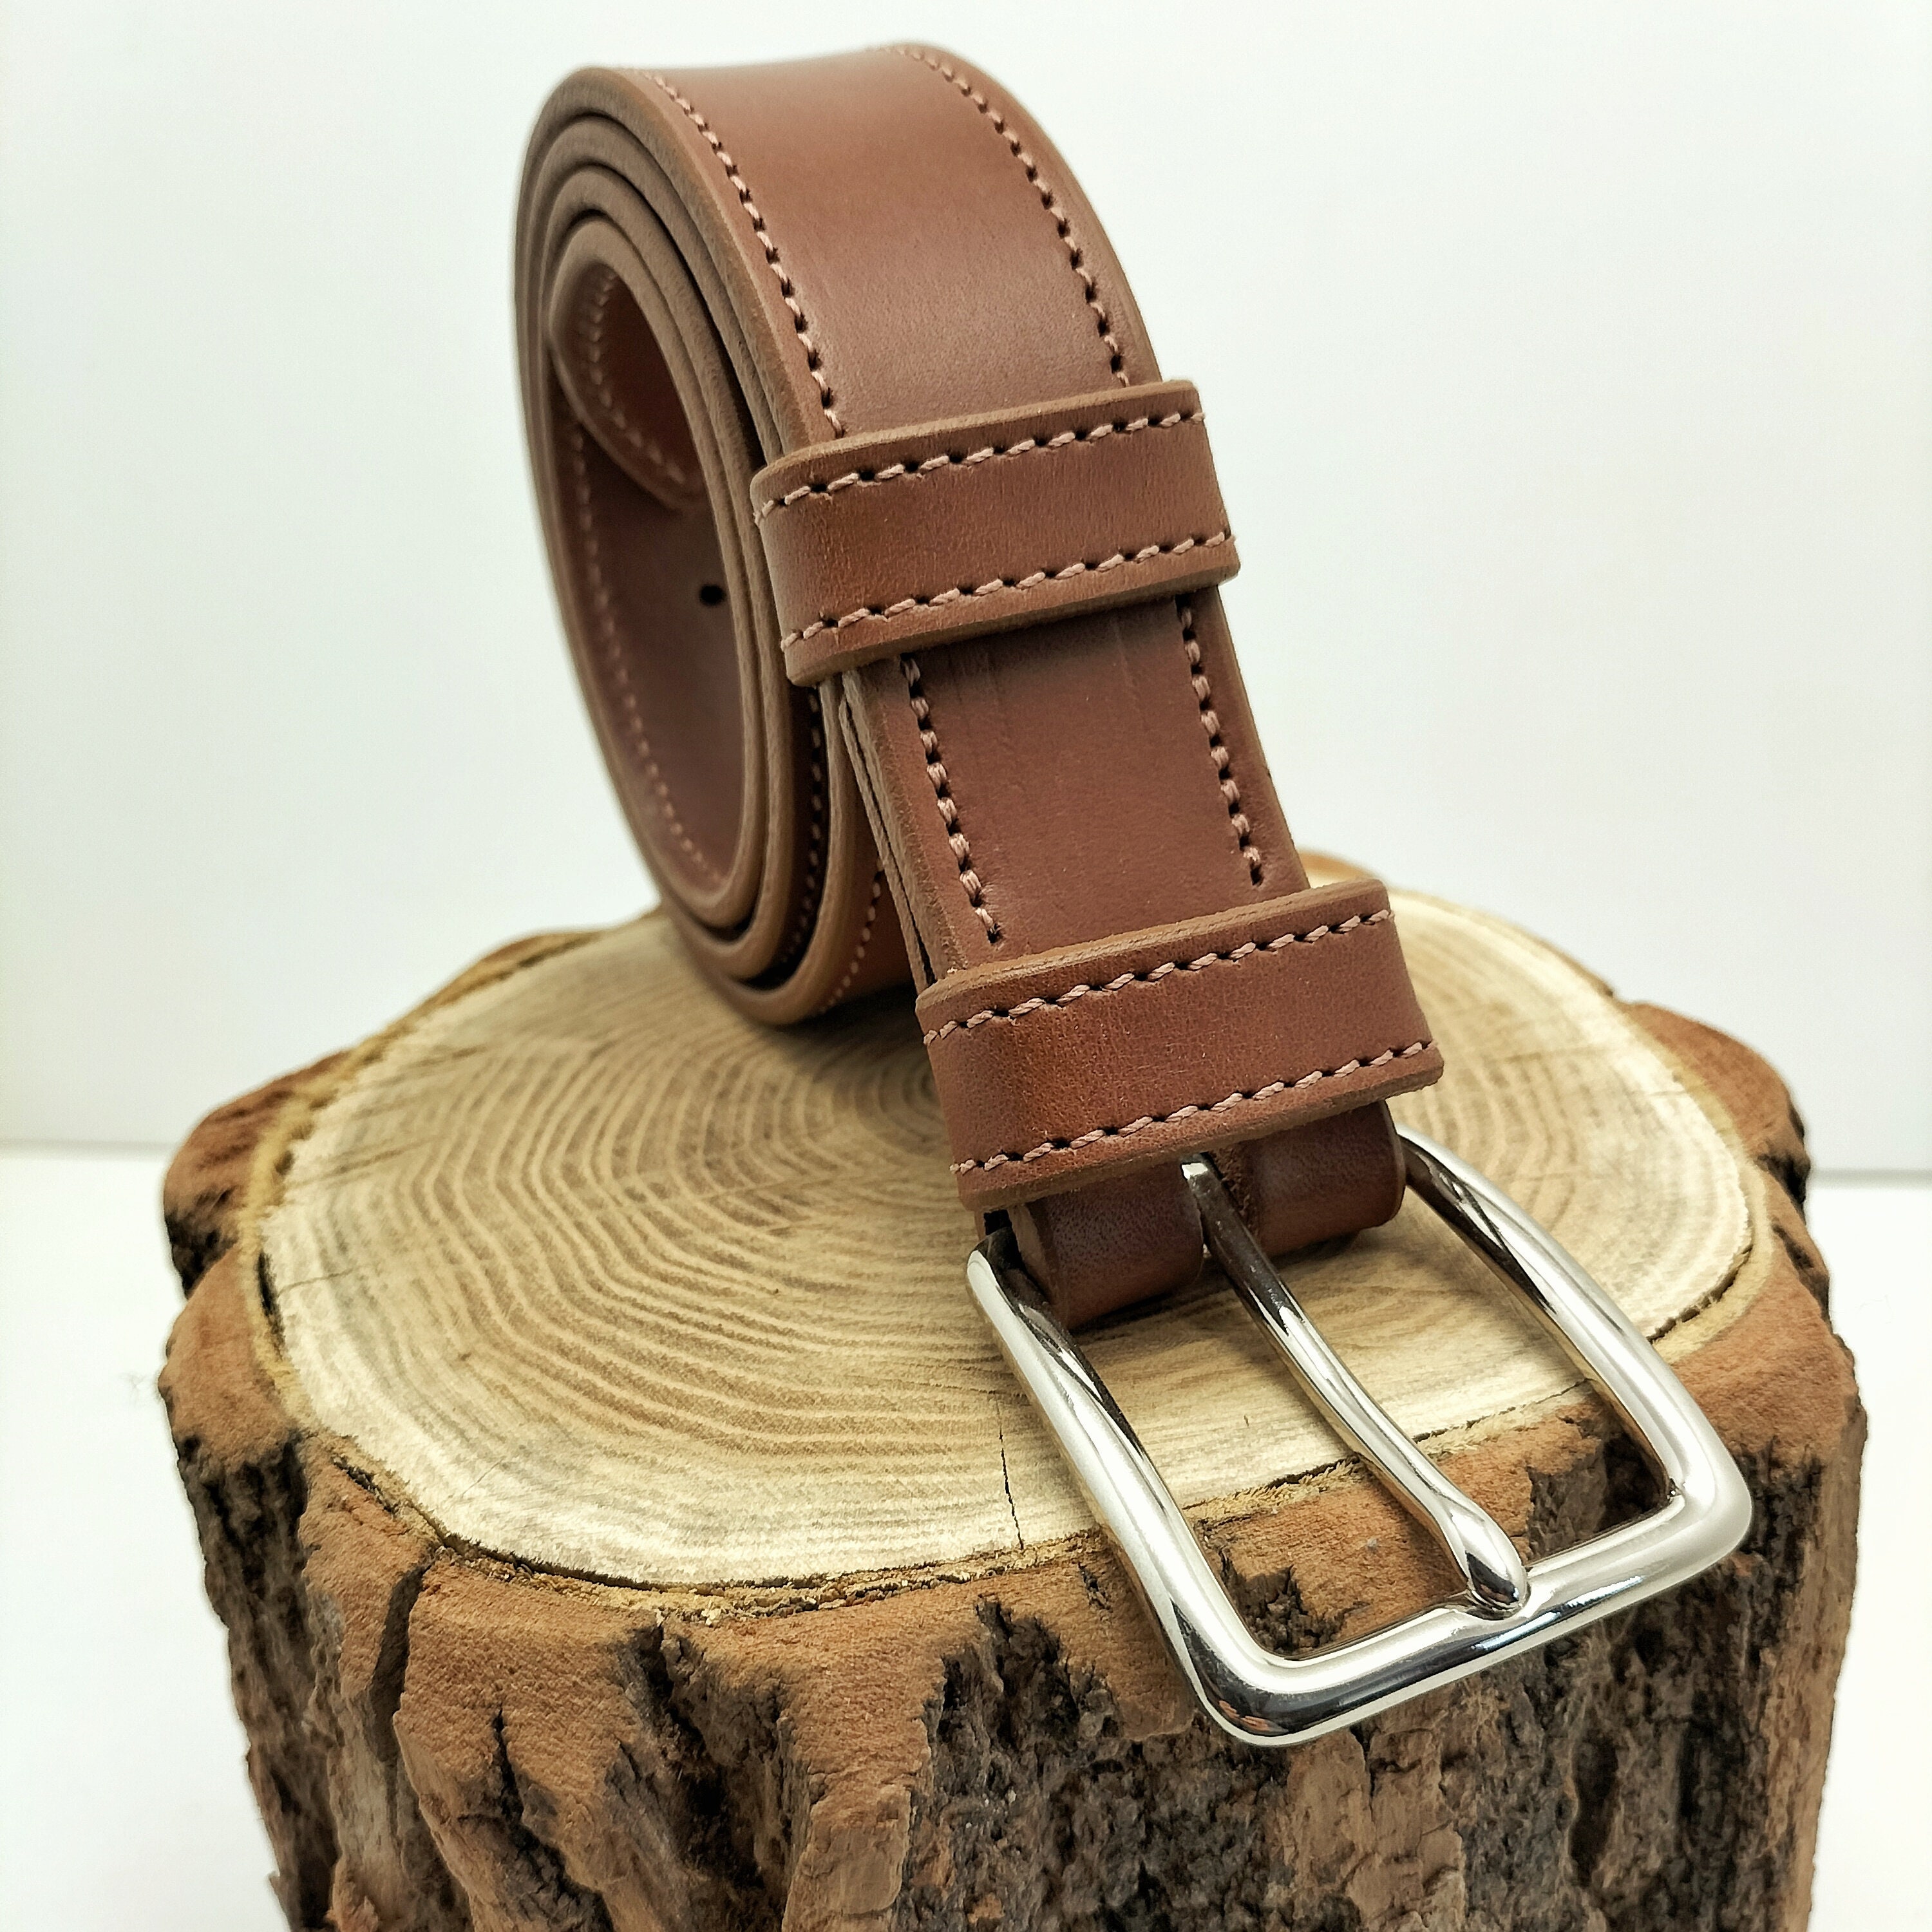 Abaco Paris Genuine Leather Brown Belt Made in France